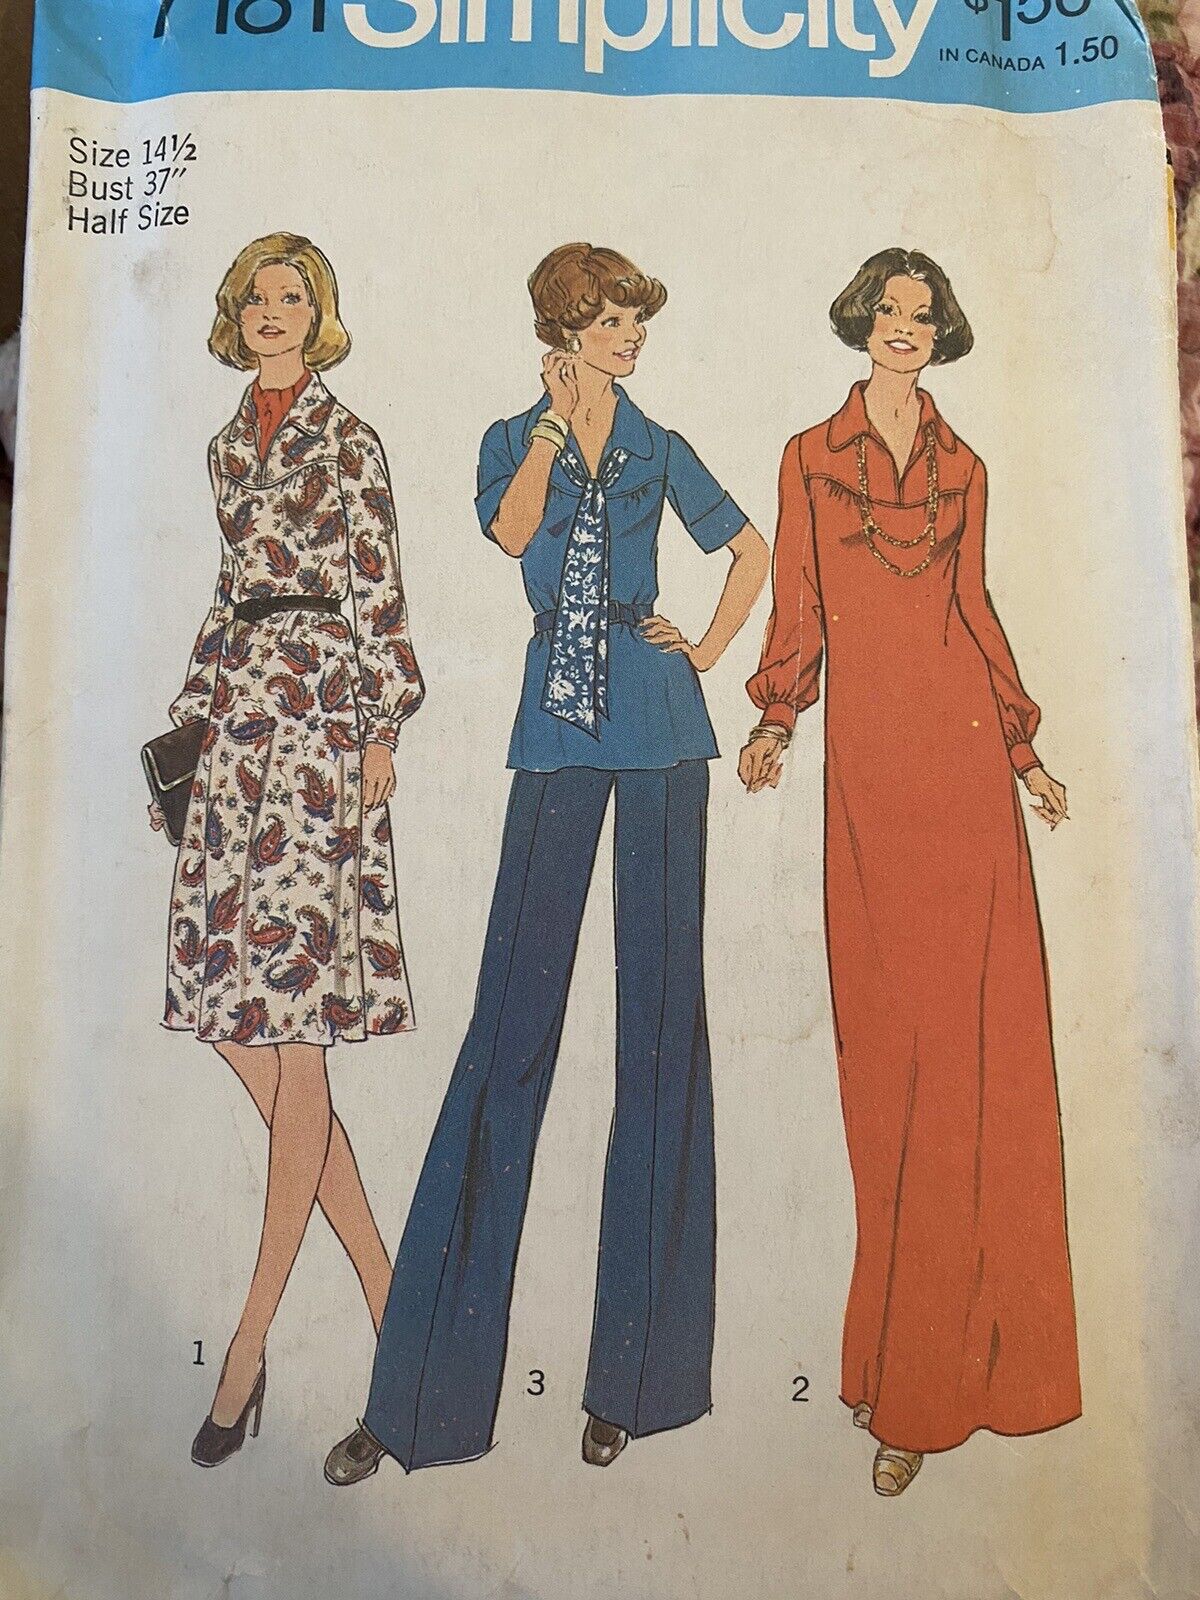 Vintage 1975 Simplicity Sewing Pattern 7181 Size 14.5 Cut and Complete 